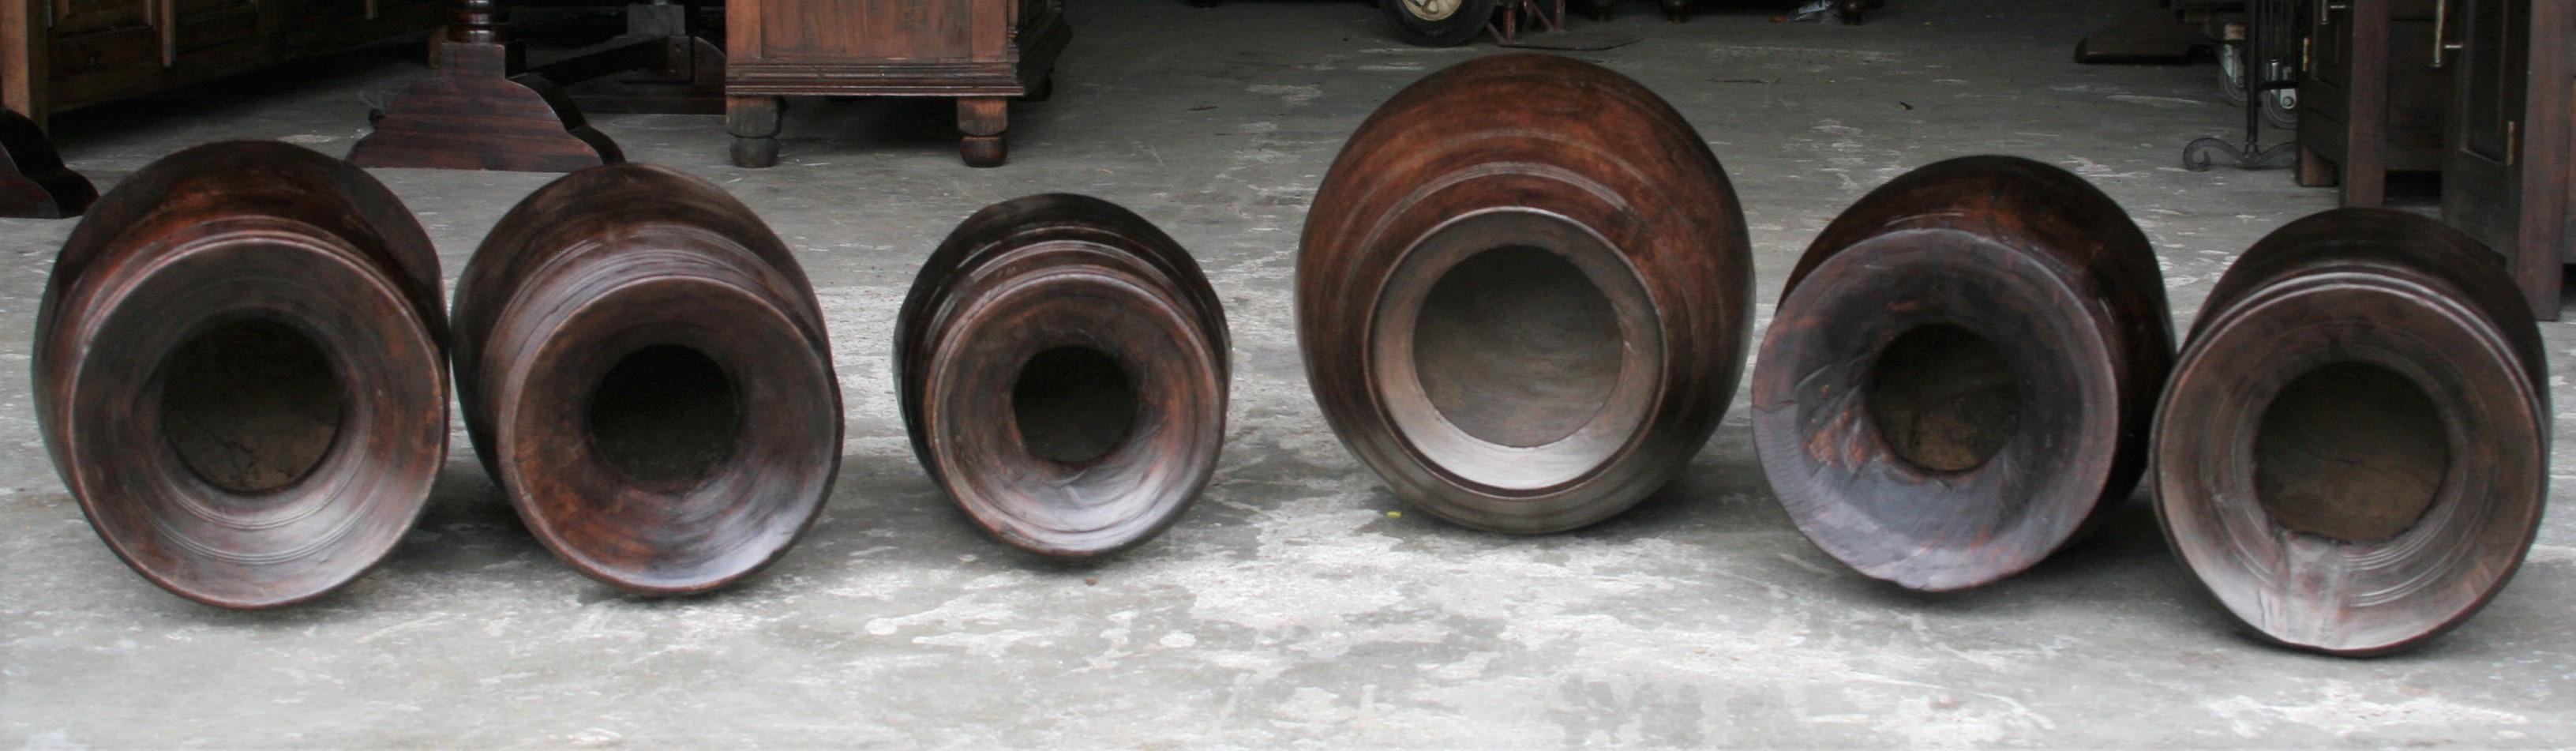 Hand carved from the north east hilly terrain of India, these pots remind us the culture and traditions of the tribal who lived in those times. These pots are much finer made indicating these were made in late 19th almost early 20th century. Wooden